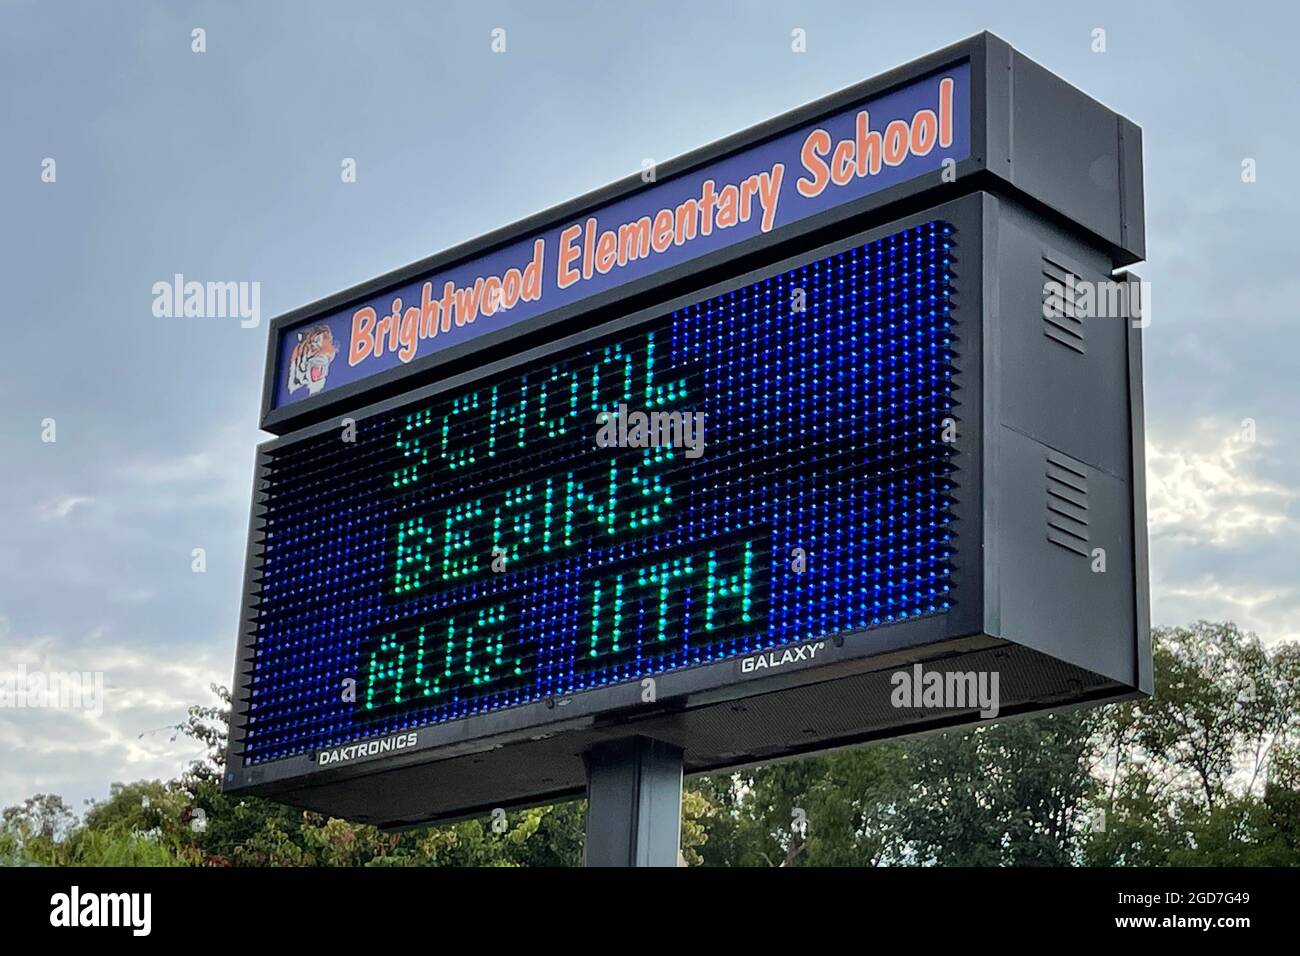 A School Begins Aug. 11 sign at Brightwood Elementary School, Wednesday, Aug. 11, 2021, in Monterey Park, Calif. Stock Photo